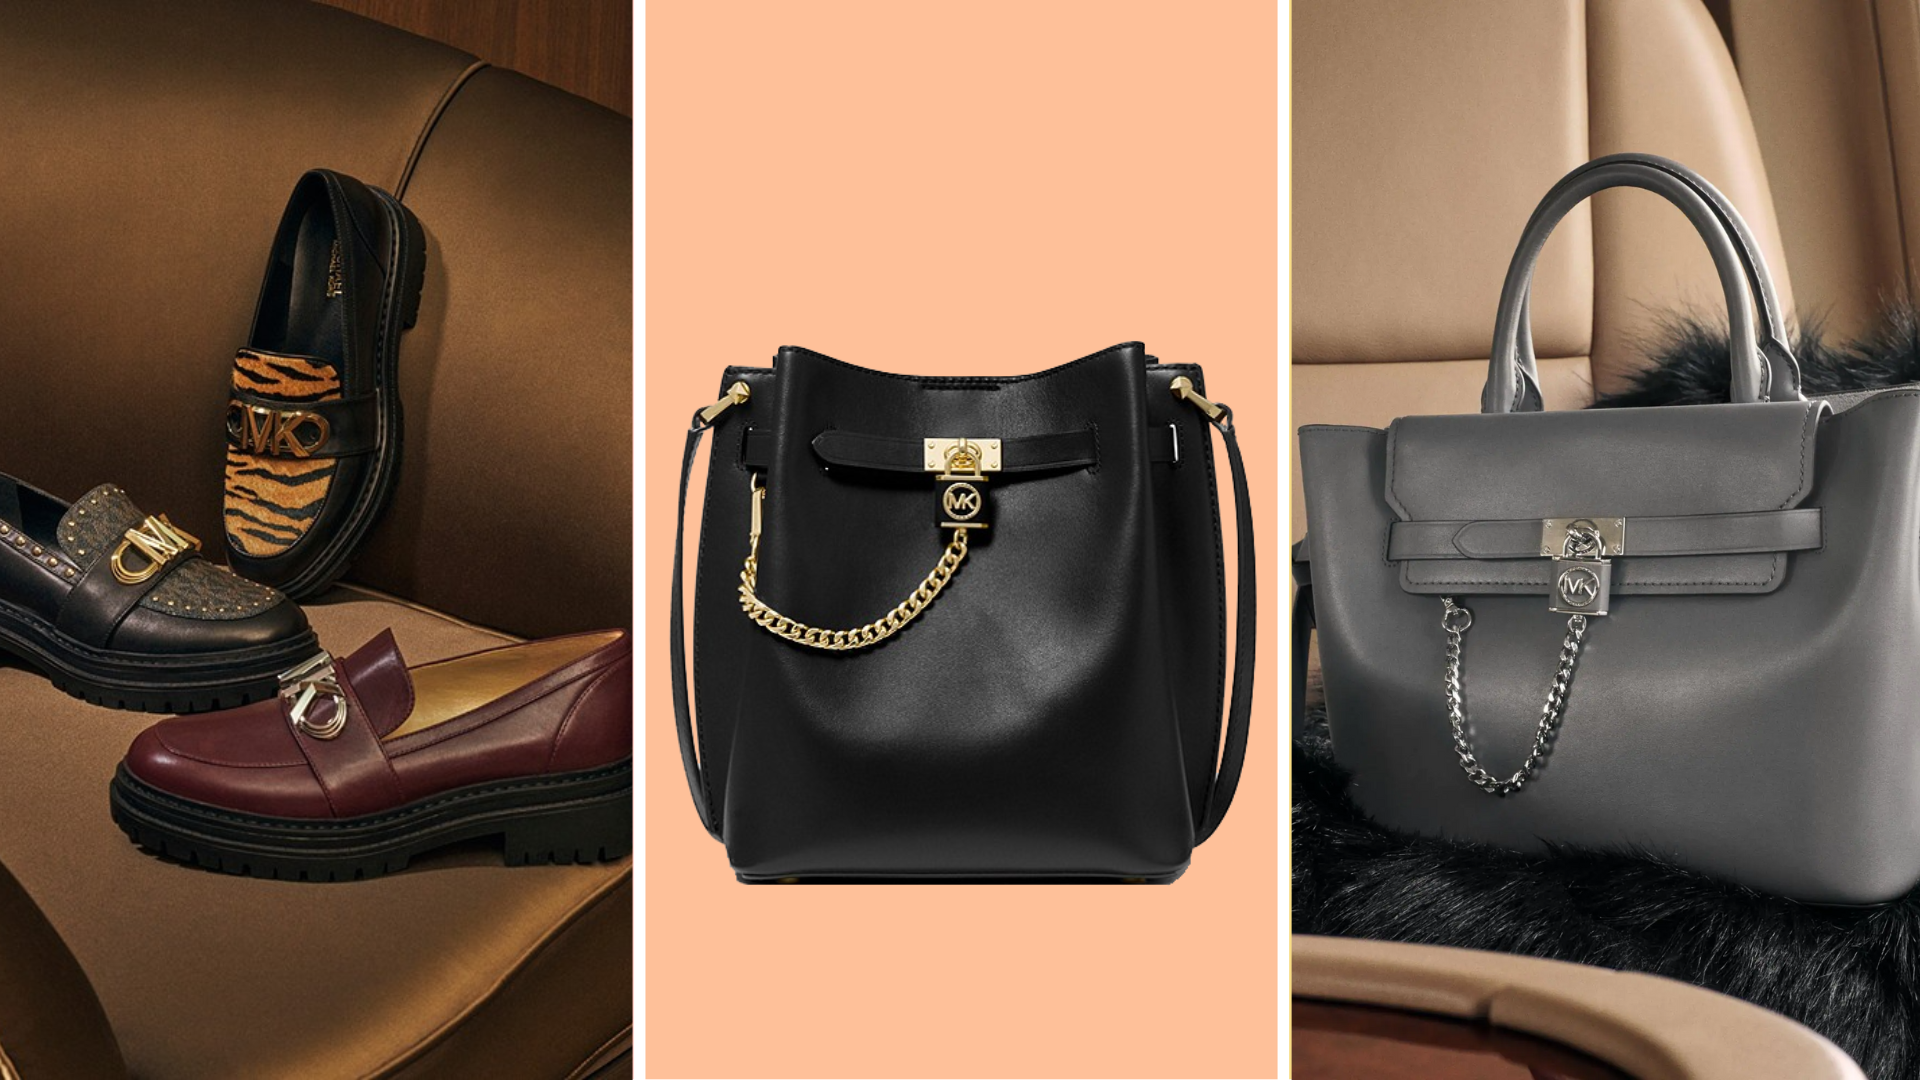 Michael Kors sale: Save big on new fall purses, totes and crossbodies